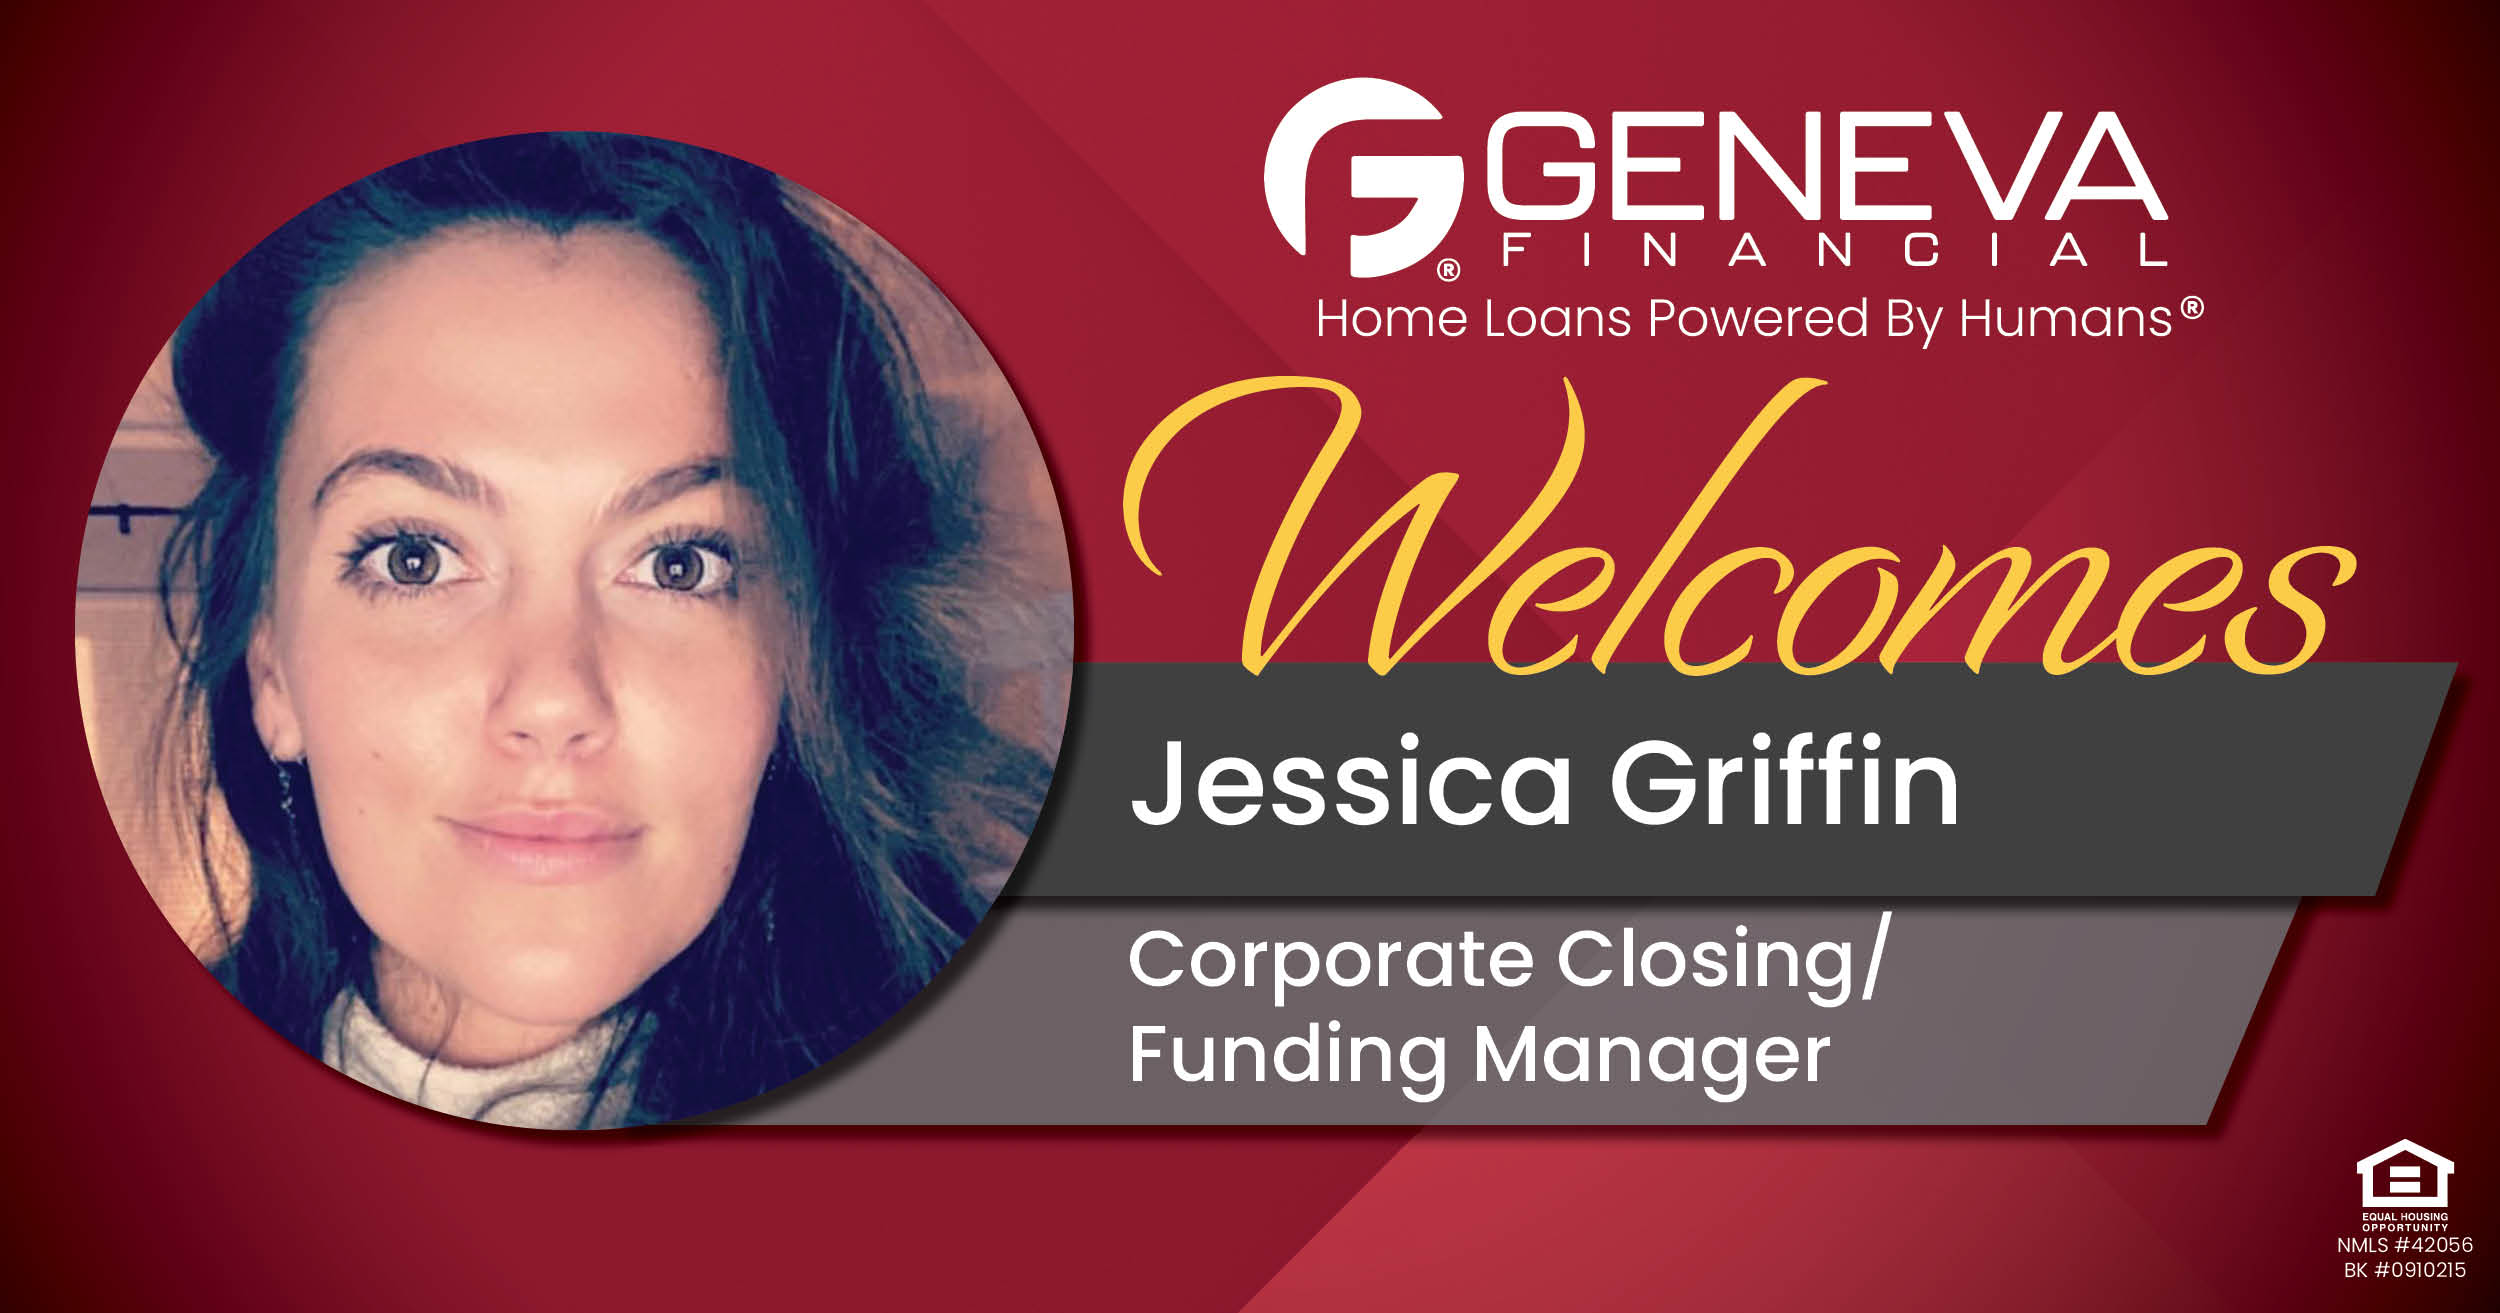 Geneva Financial Welcomes New Closing/Funding Manager Jessica Griffin to Chandler, Arizona – Home Loans Powered by Humans®.